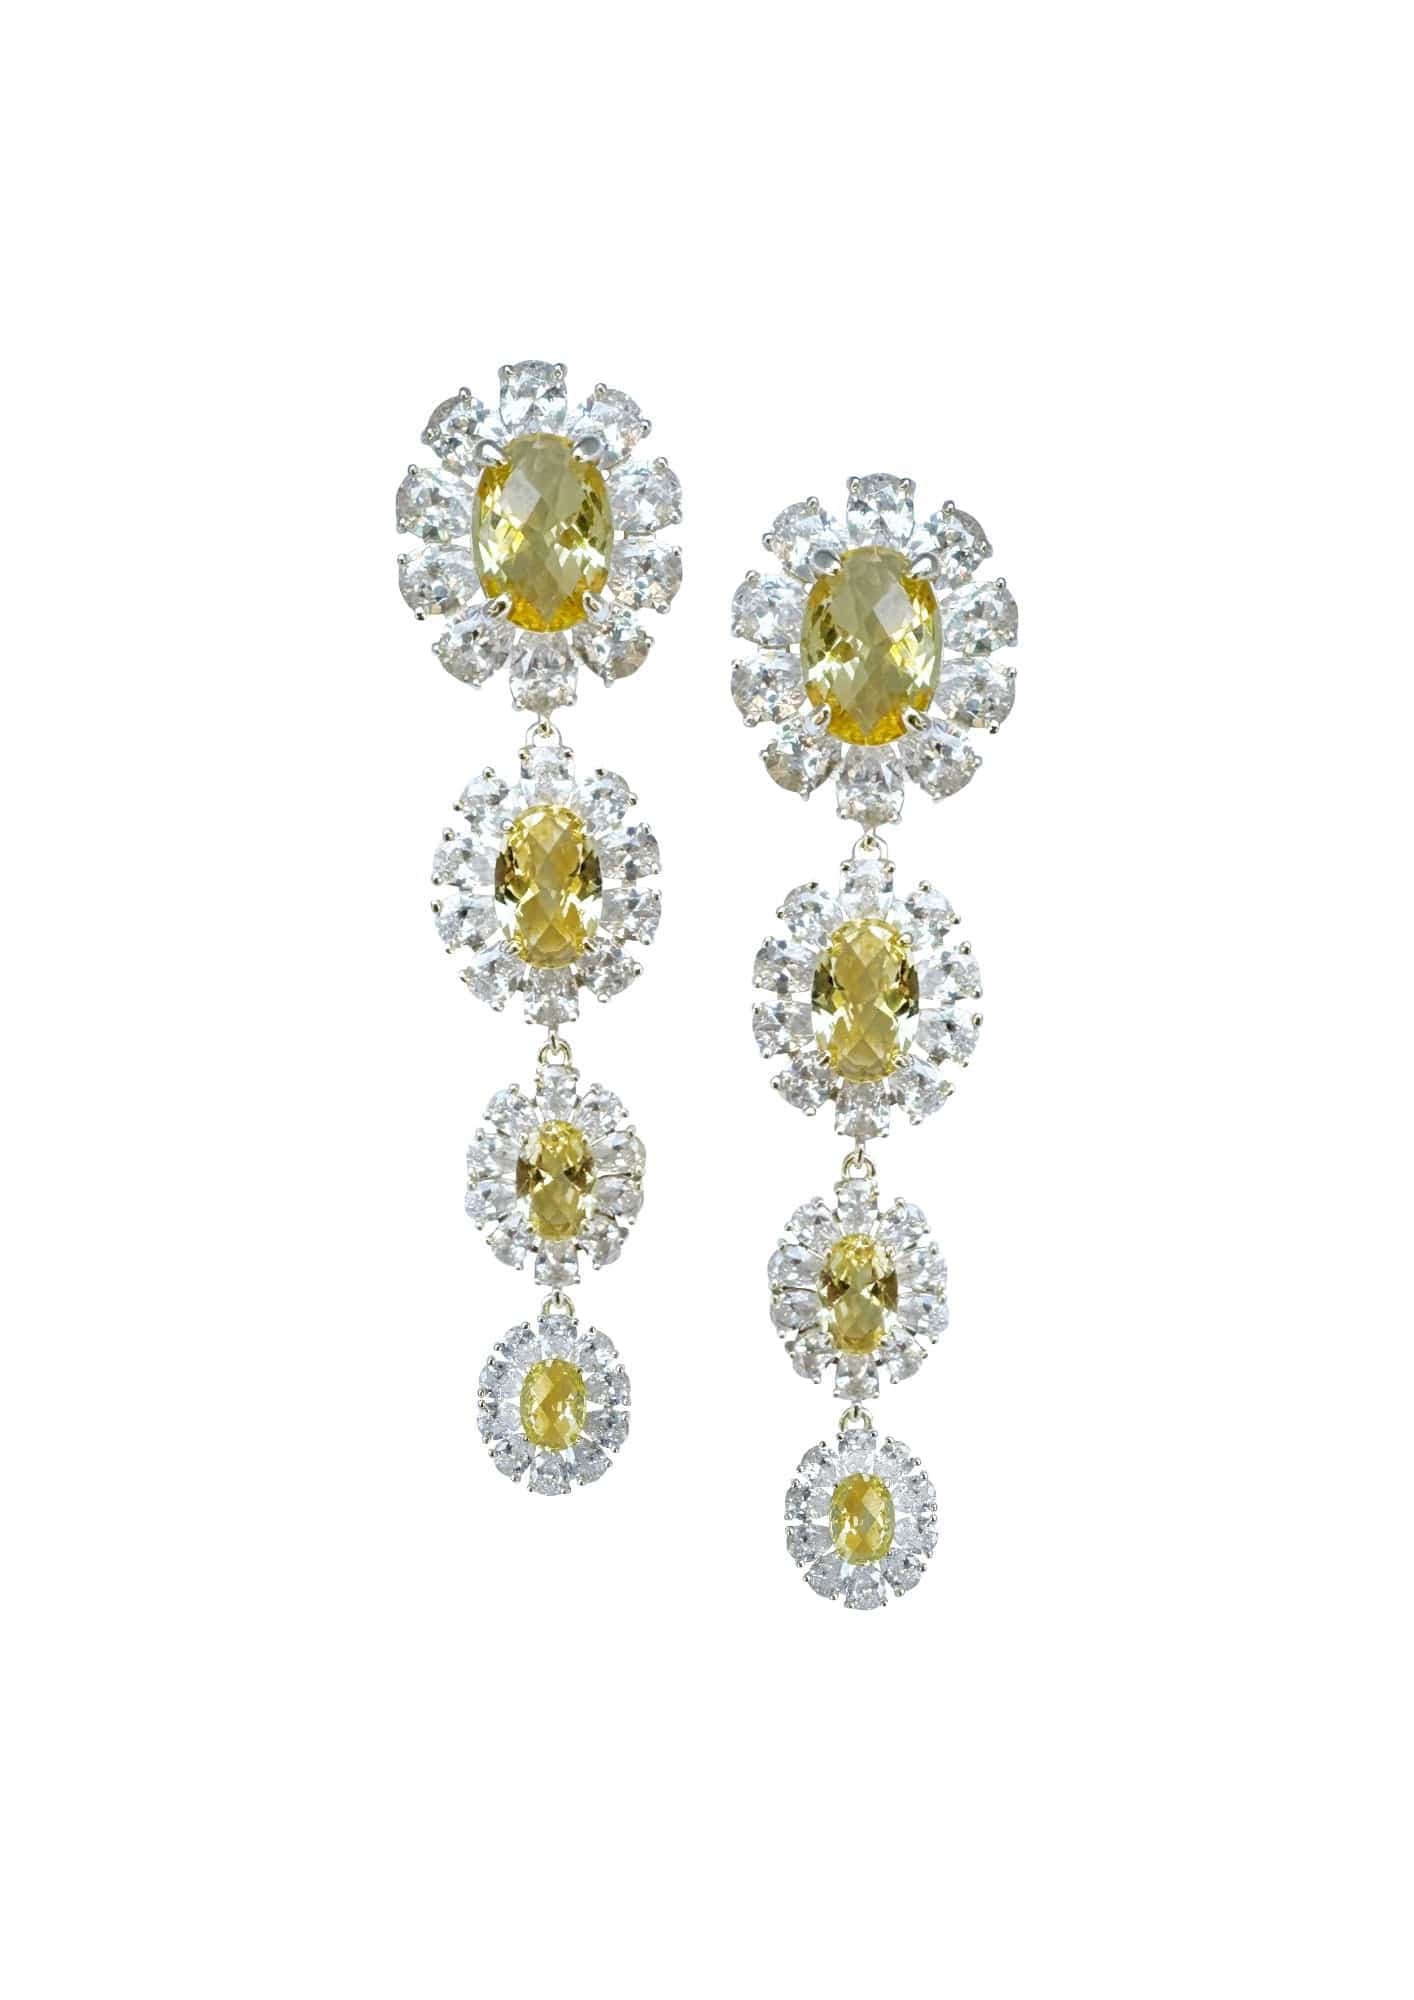 Nicola Bathie Jewelry Earrings Gold Embellished Canary Drops